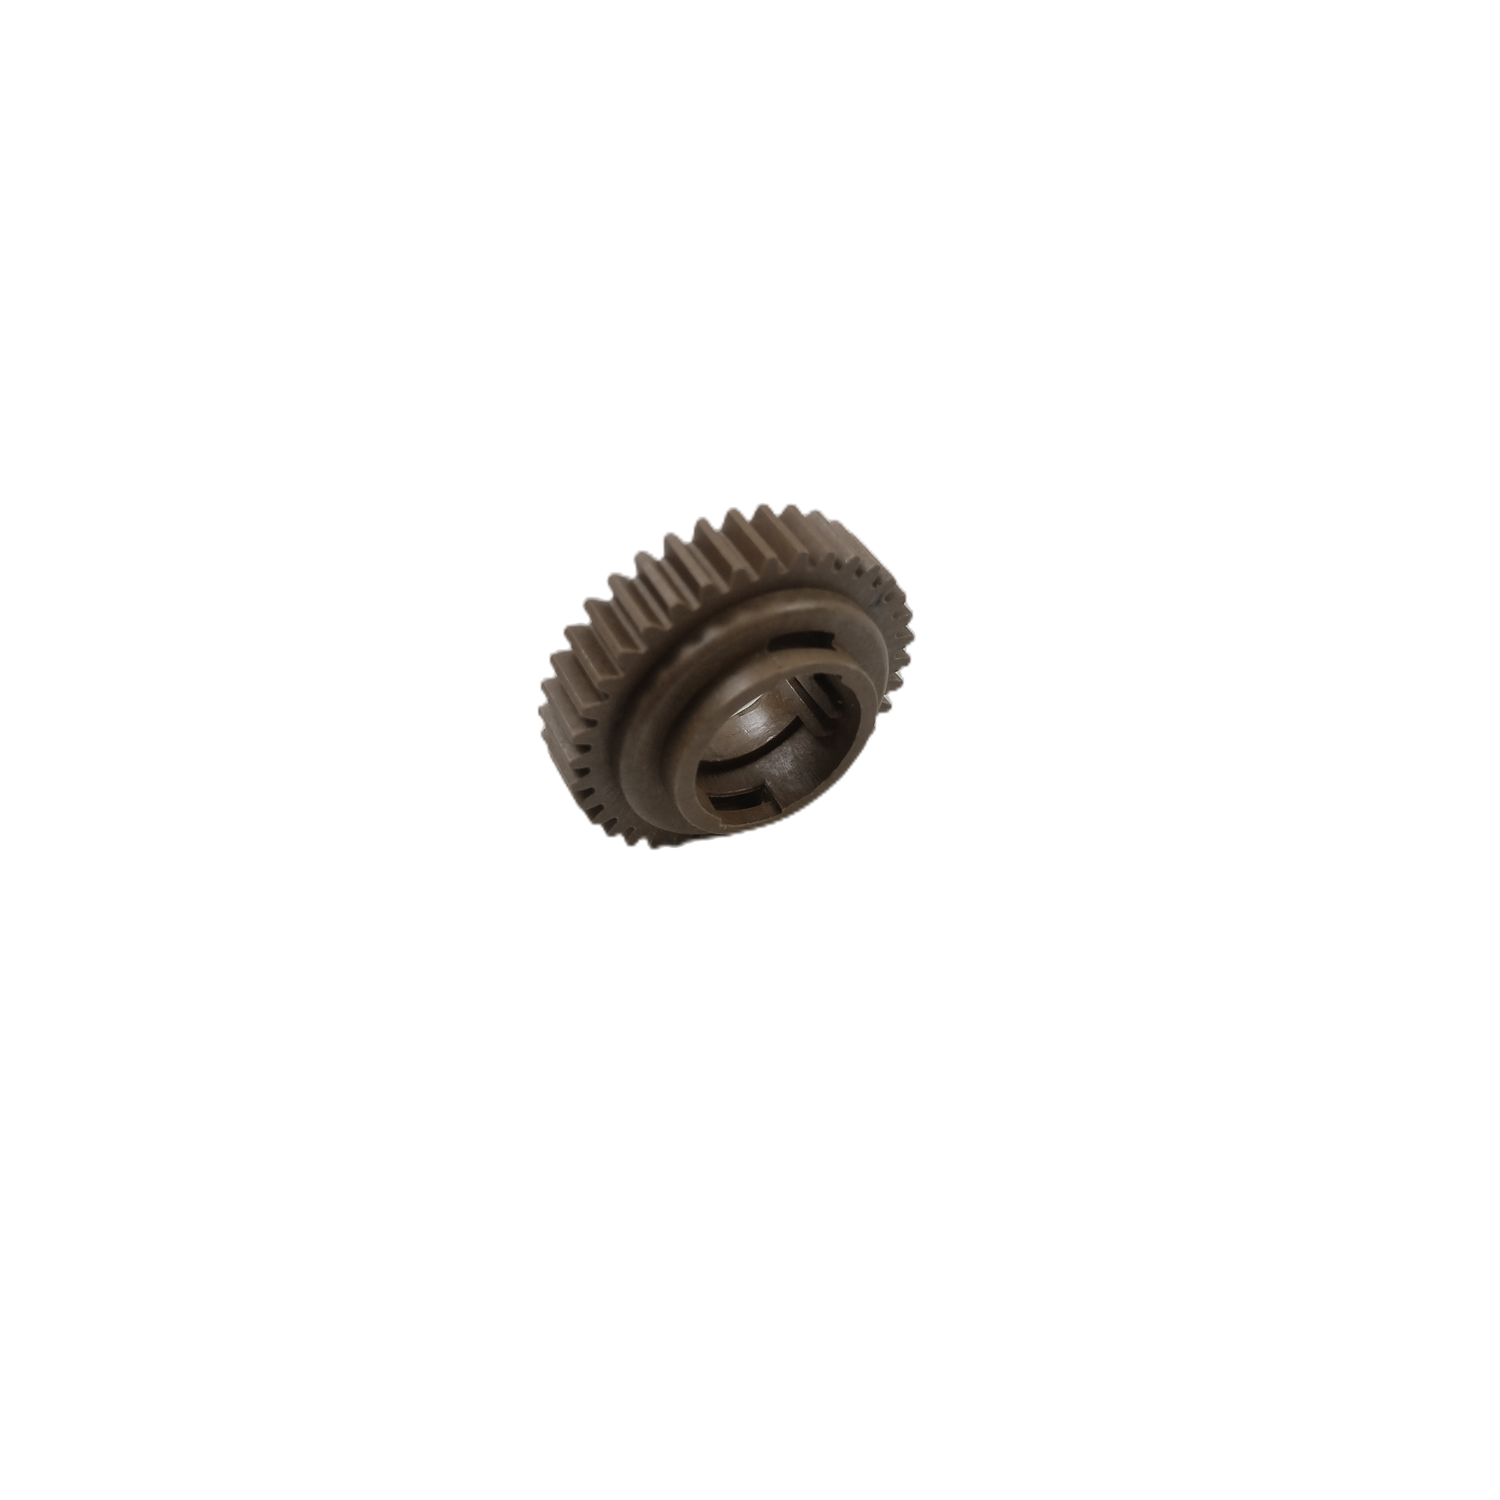 https://www.copierconsumables.com/upper-roller-gear-for-samsung-4020-4072-jc66-02775ab-product/